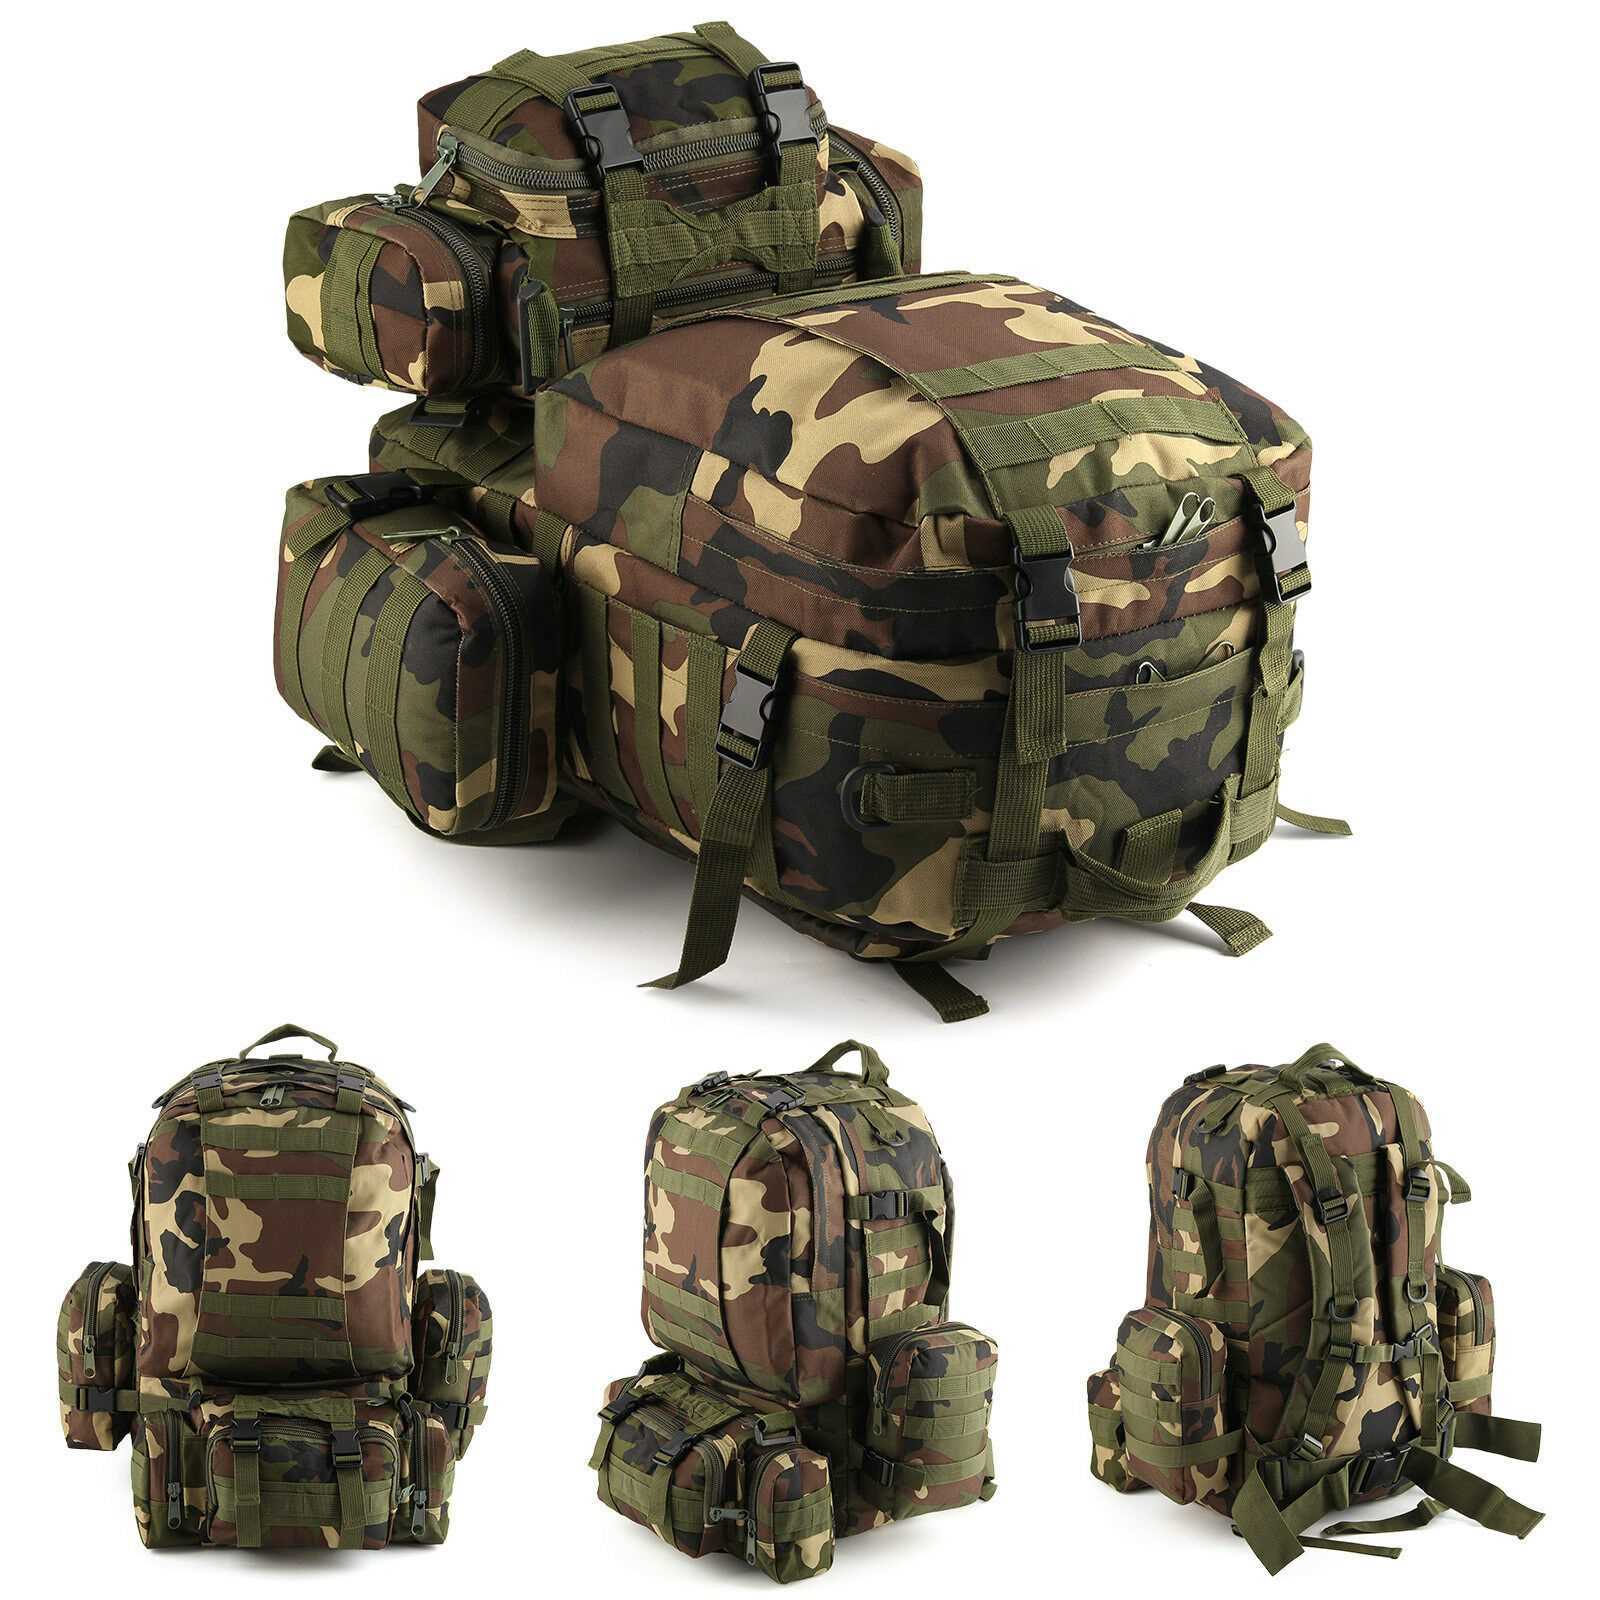 Wooden Camouflage 50L Modern Military Tactical Army Rucksacks Molle Backpack Camping Hiking Bag